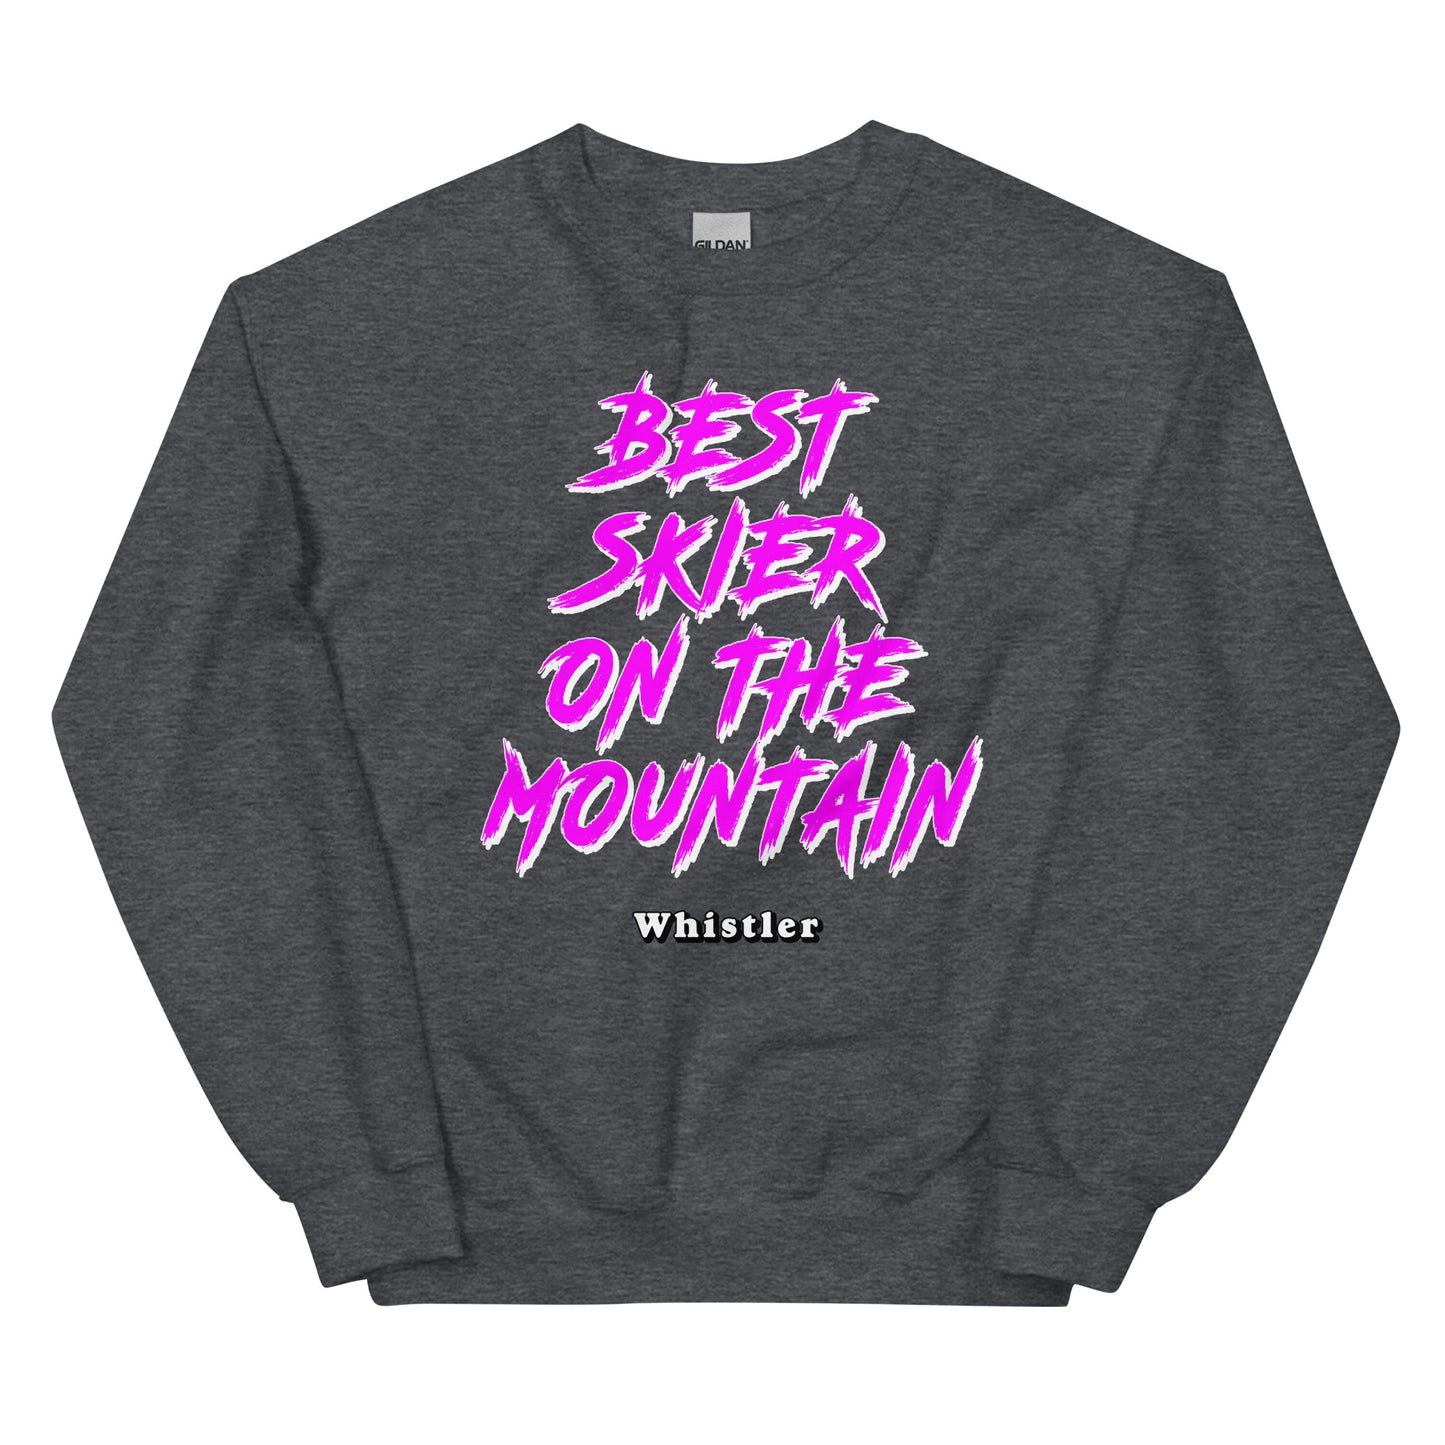 best skiier on the mountain whistler design printed on a crewneck sweatshirt by Whistler Shirts